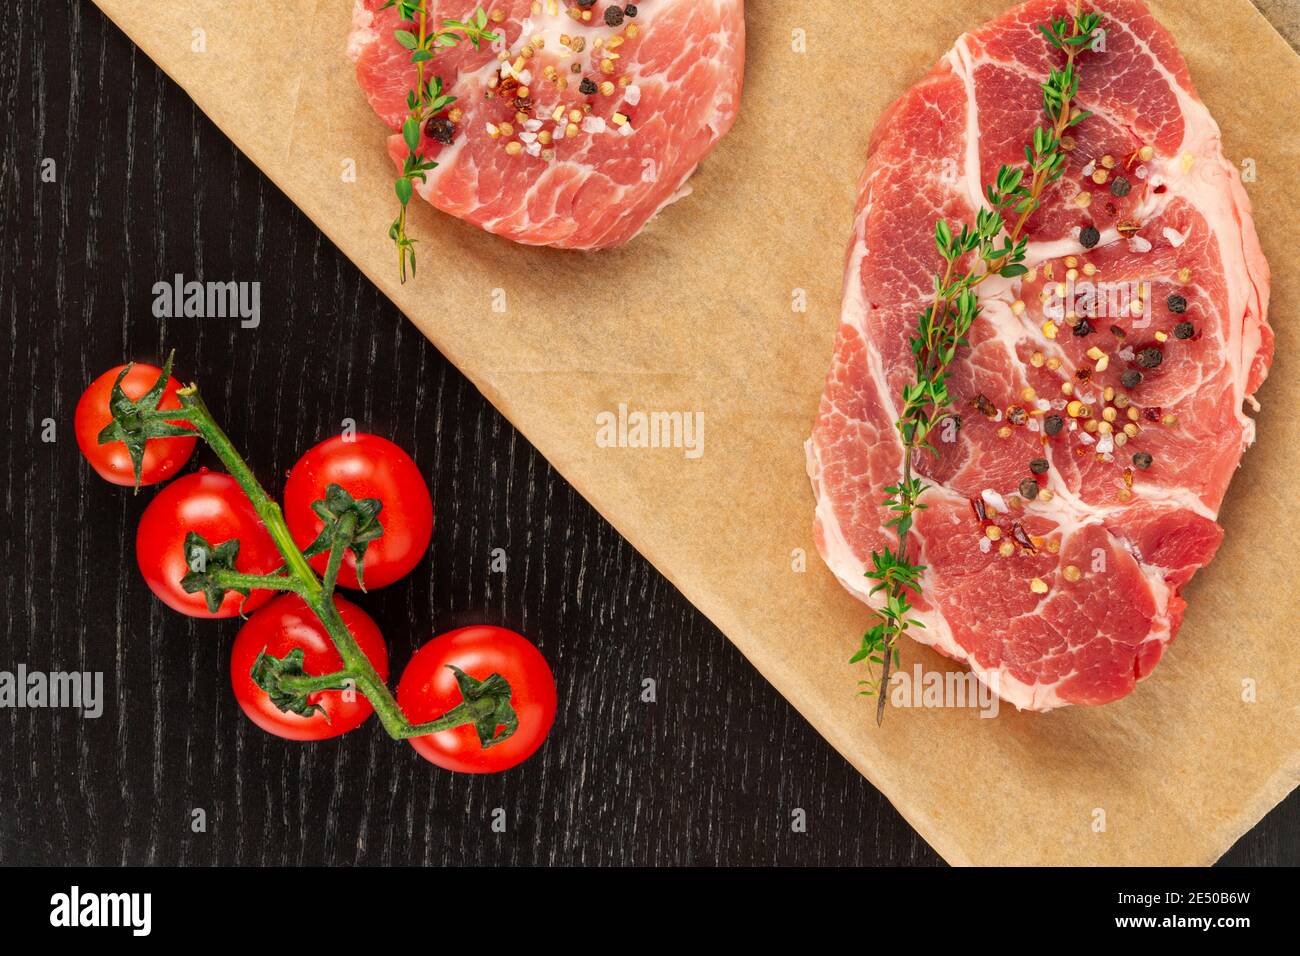 freshly chopped raw pork steaks with spices and thyme on a sheet of parchment. near ripe red tomatoes Stock Photo